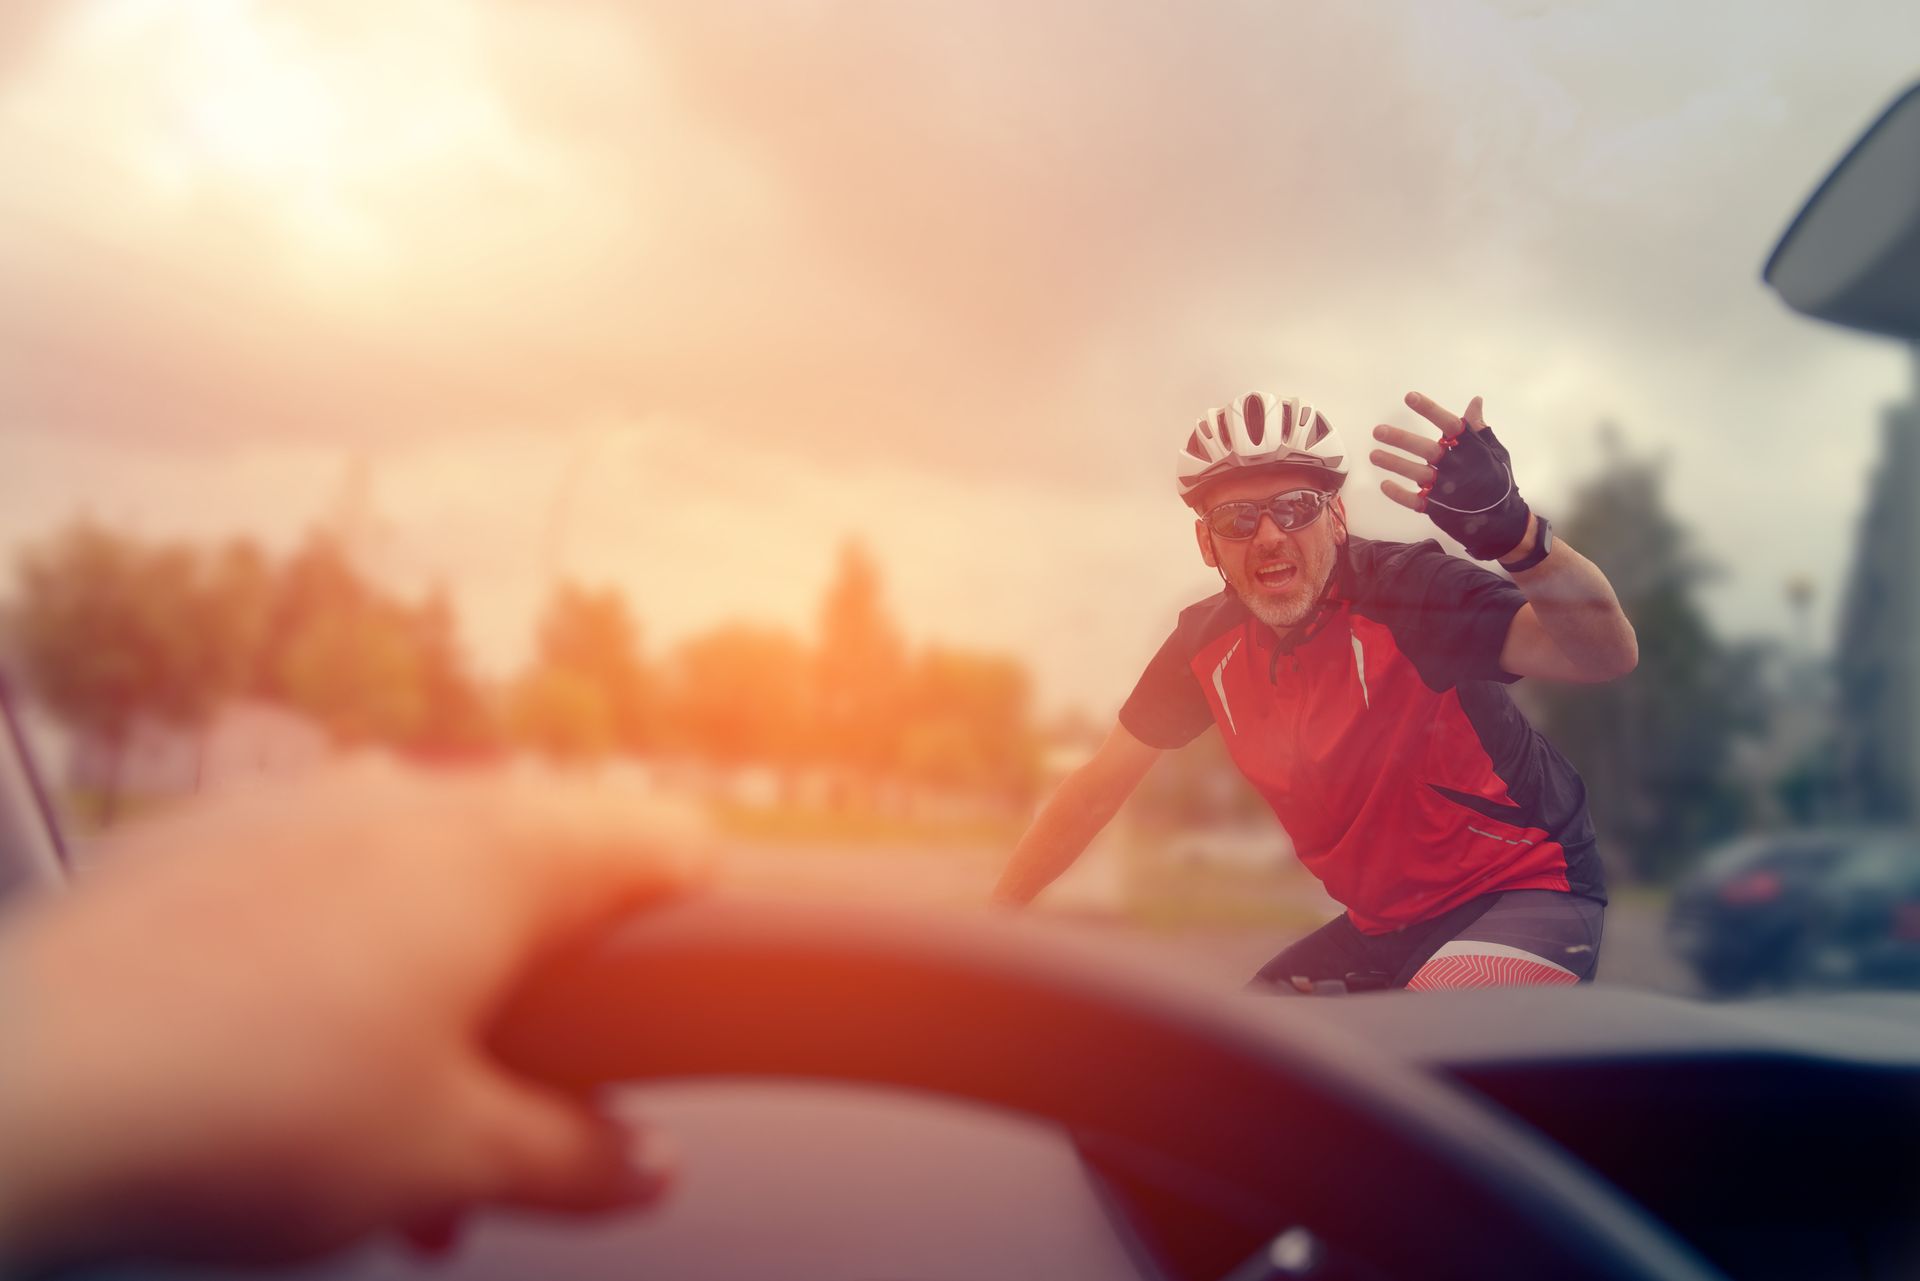 Motorist in the path of a cyclist causing bicycle rider to gesture in anger